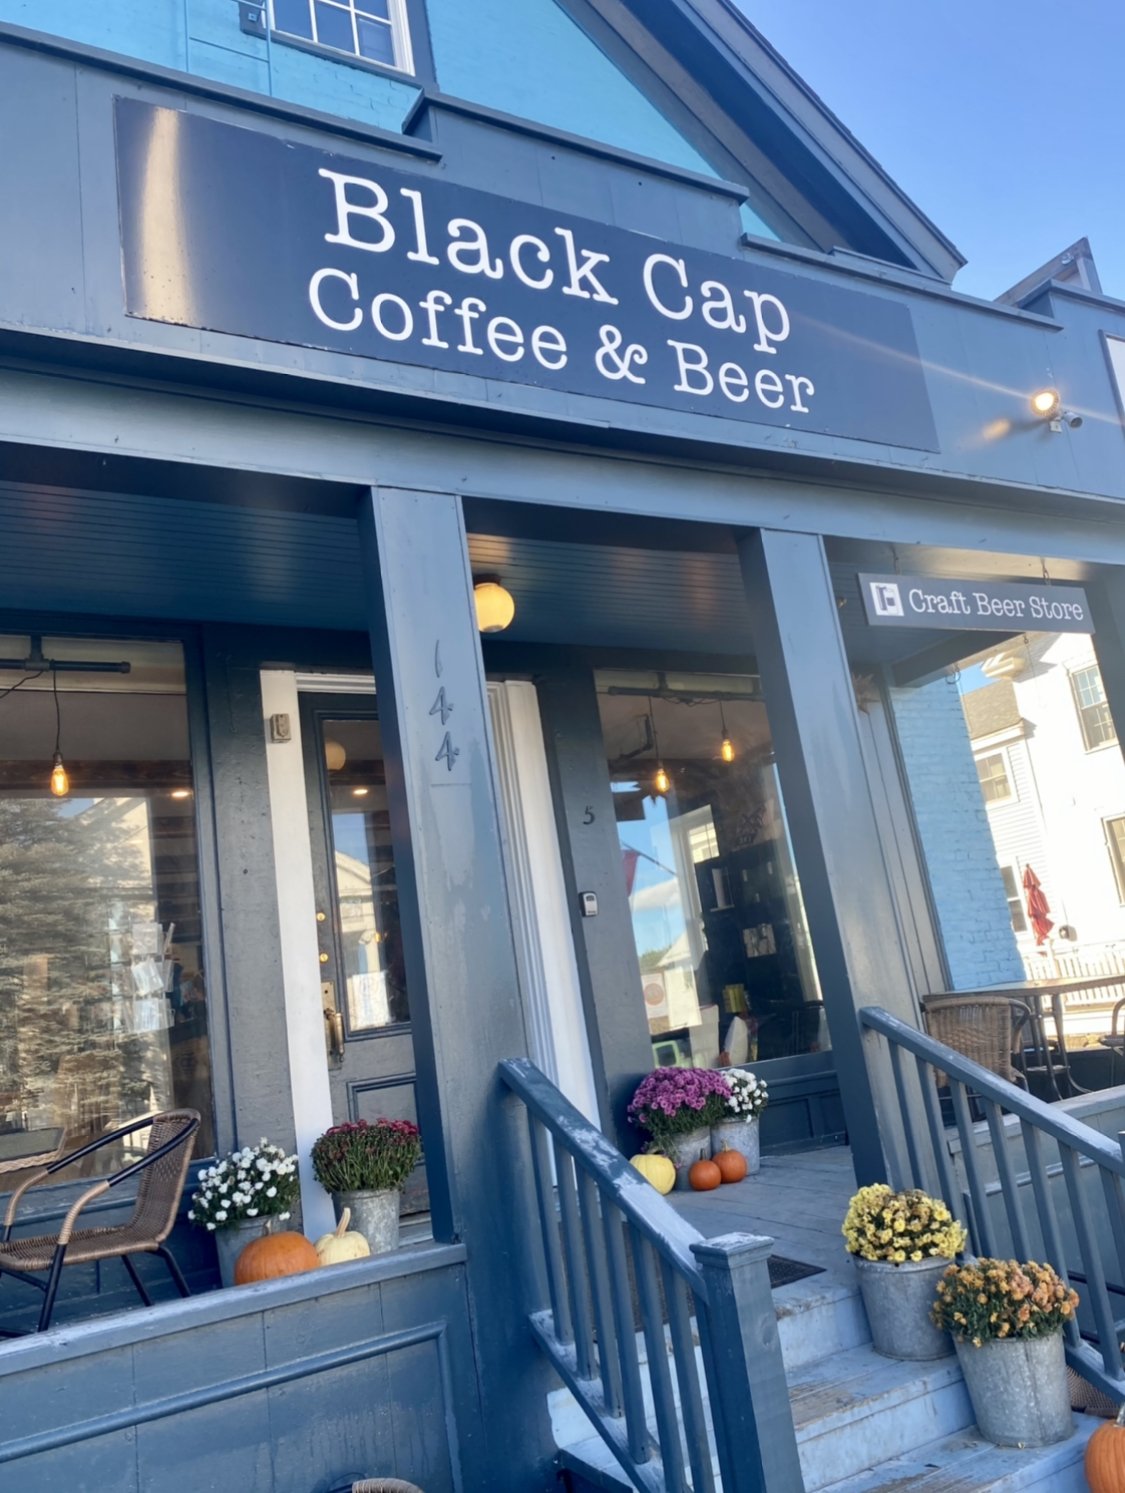 Where to Eat - Black Cap for coffee and breakfastvon Trapp Brewery Idylltime BreweryCold Hollow Cider Mill - MUST try the cider donuts!